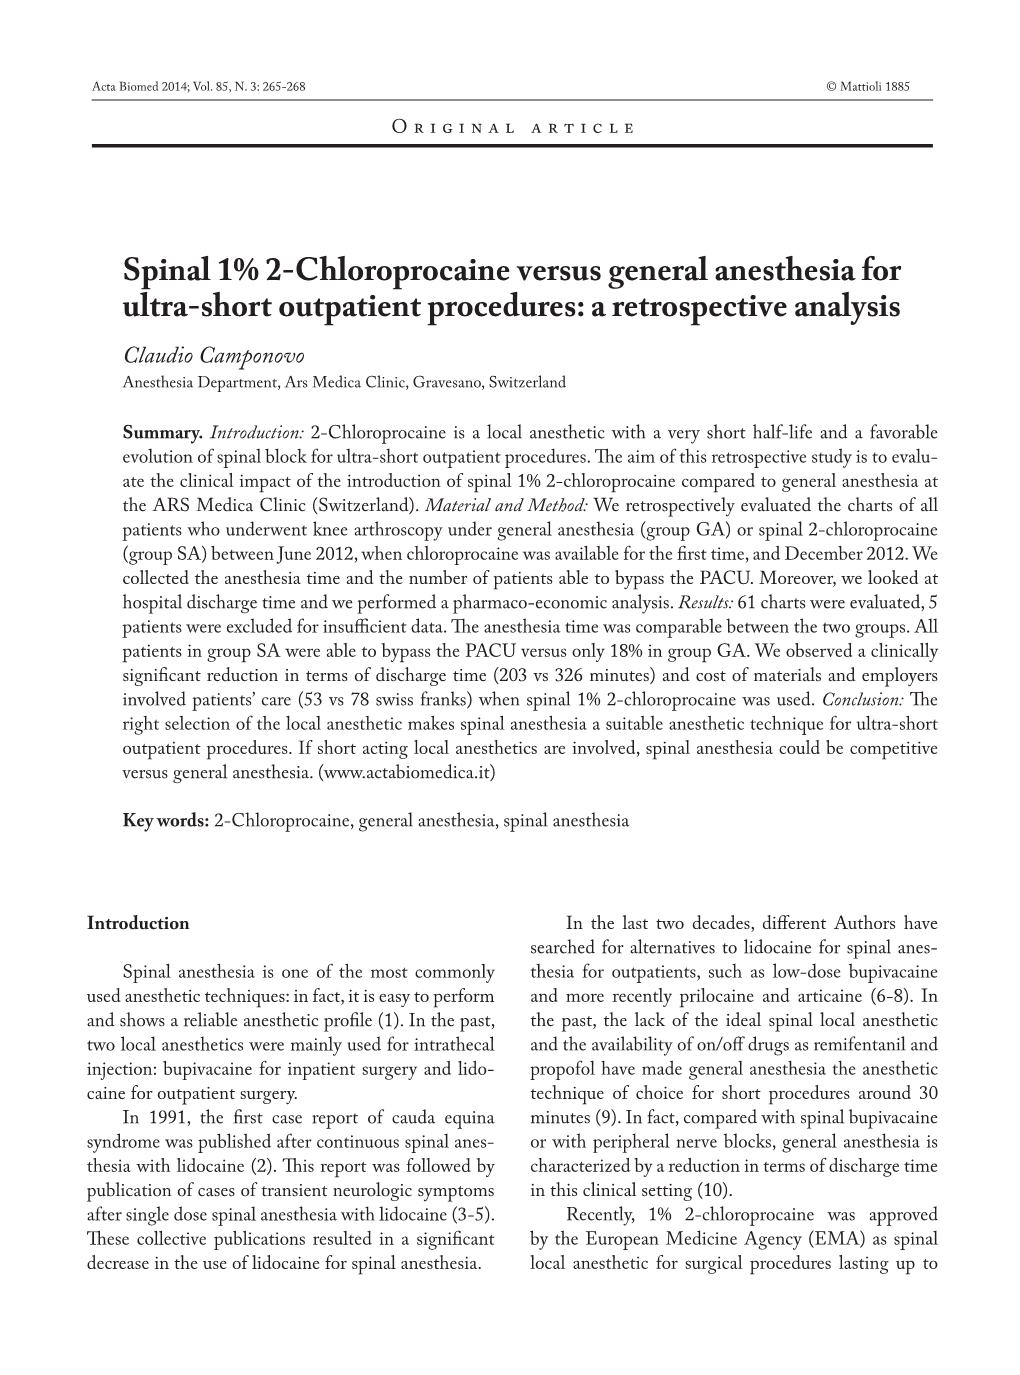 Spinal 1% 2-Chloroprocaine Versus General Anesthesia for Ultra-Short